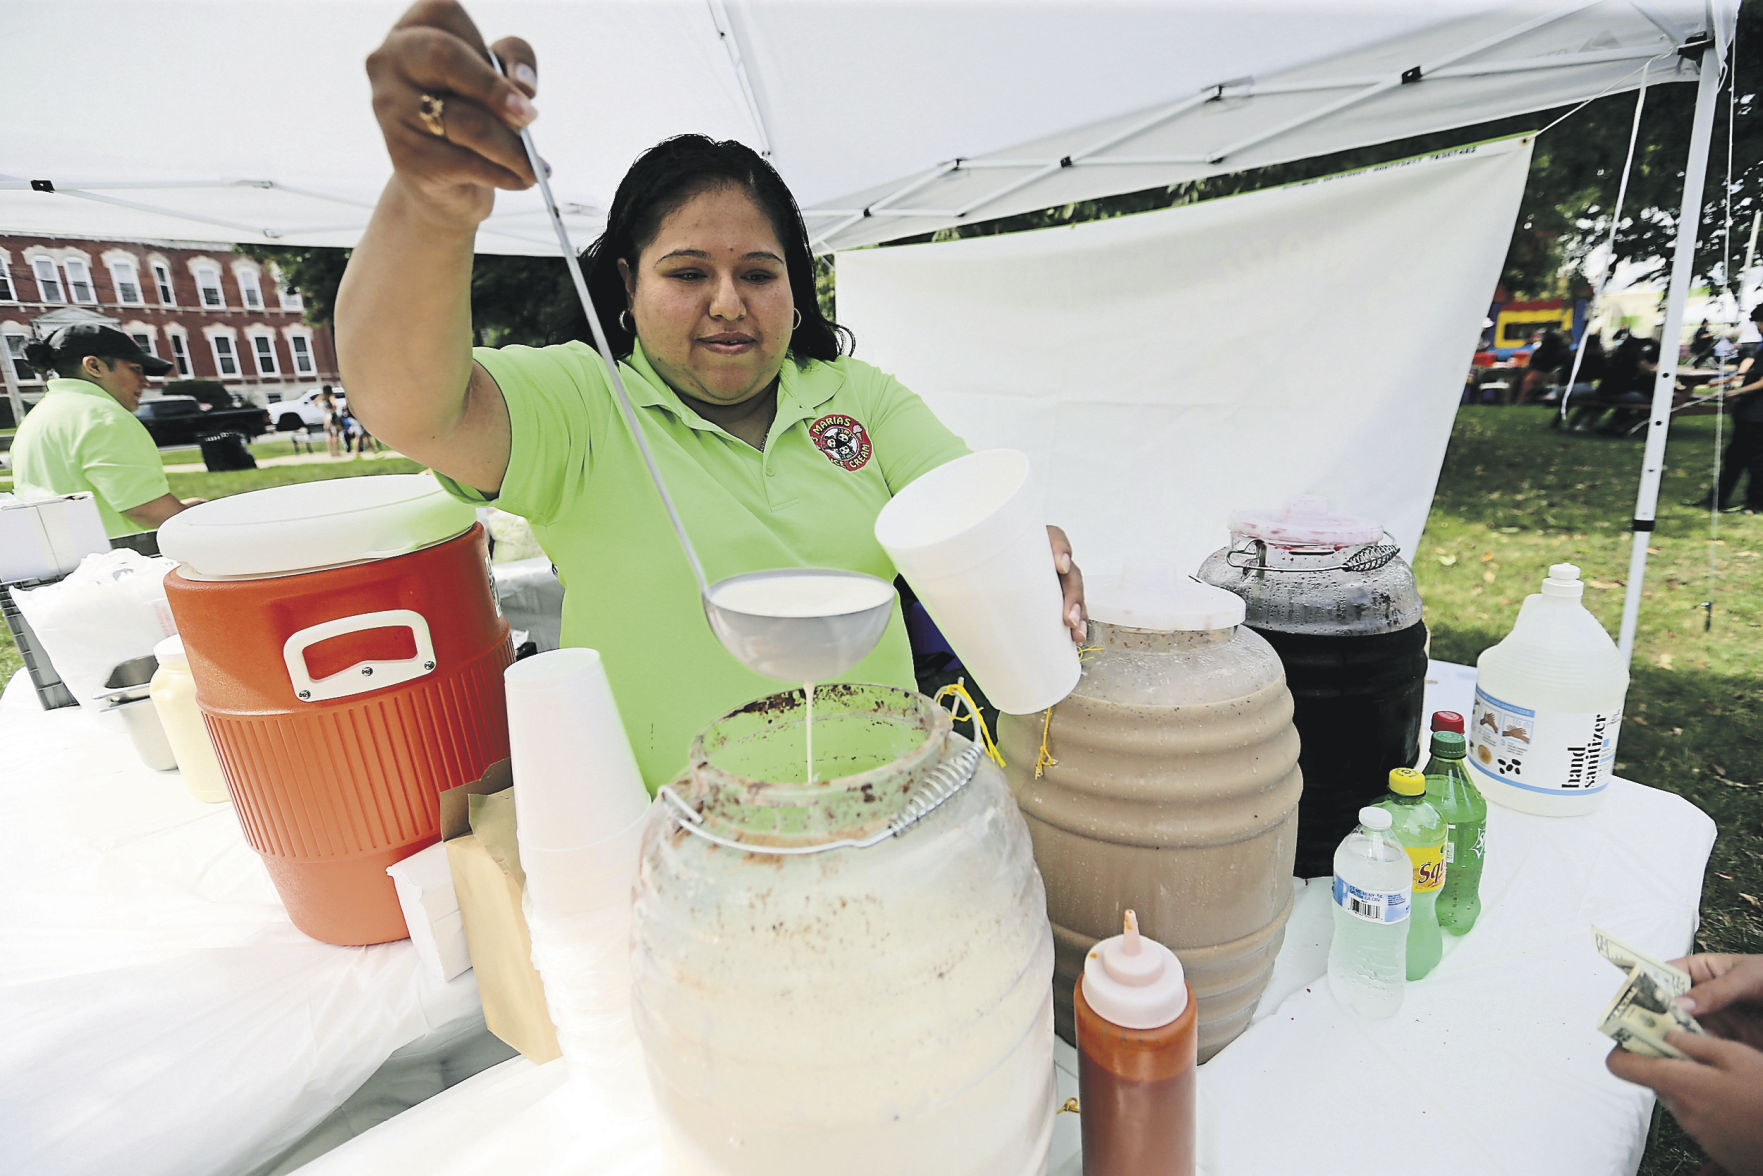 Yessica Flores, with 3 Marias Ice Cream in Platteville, Wis., serves horchata during Dubuque Latinx Fiesta.    PHOTO CREDIT: JESSICA REILLY